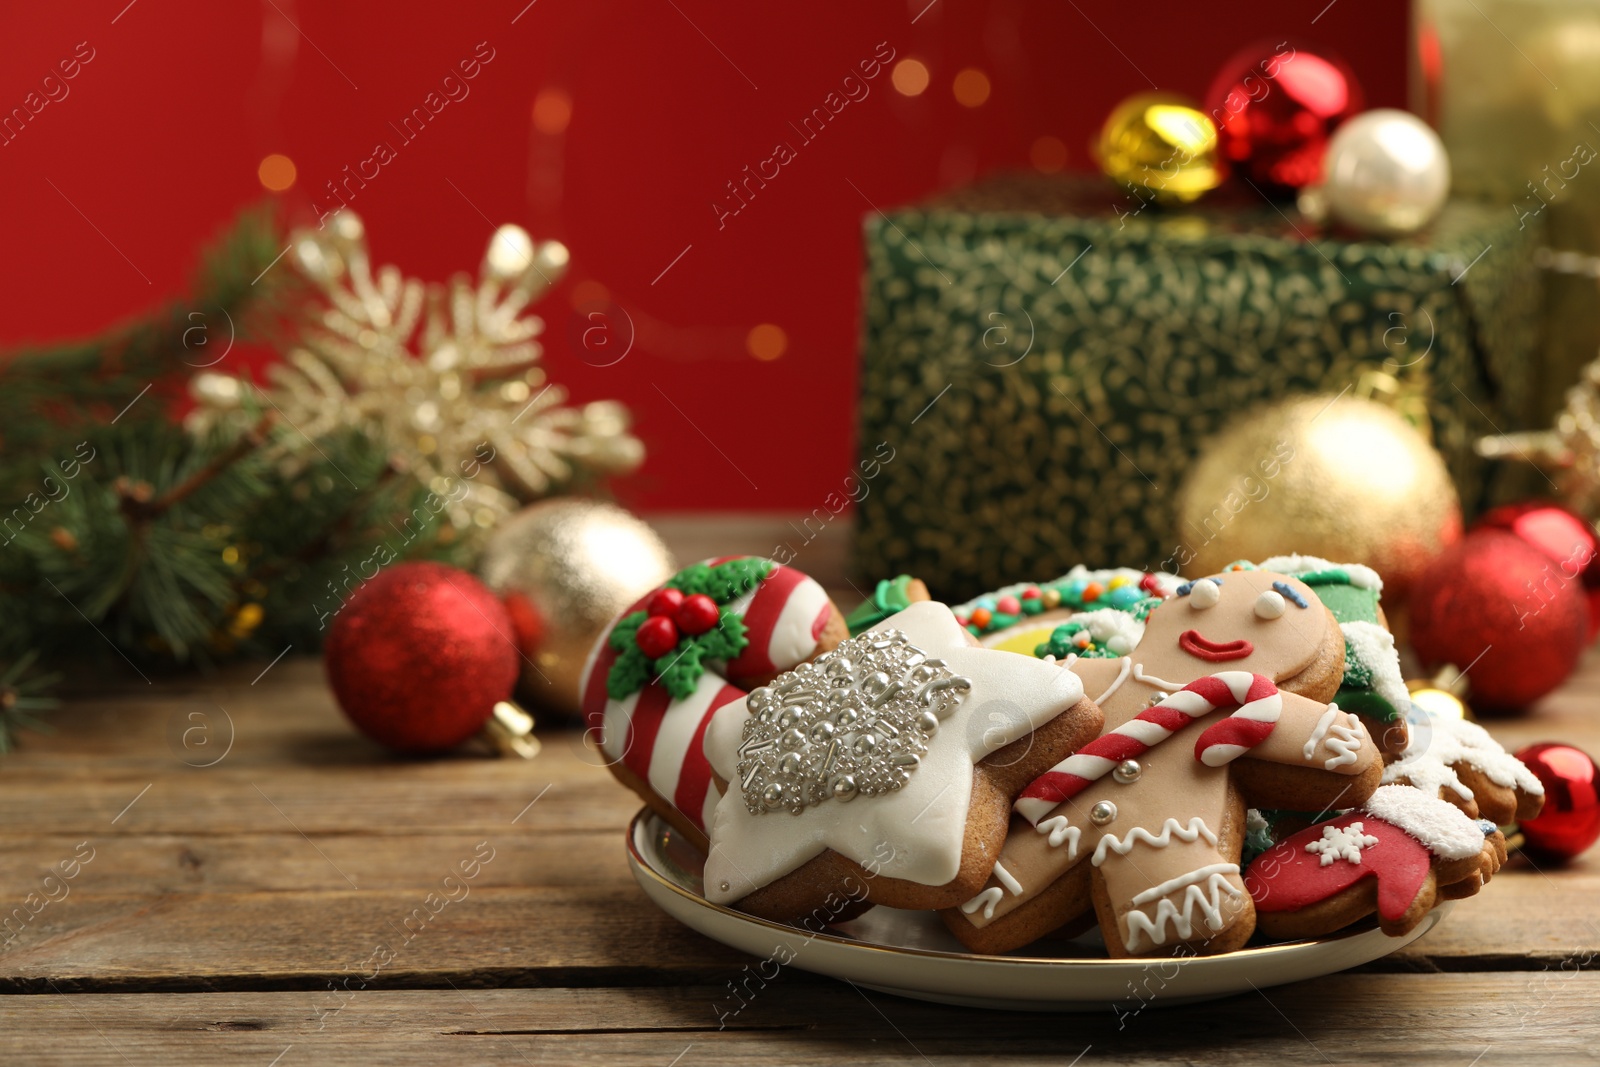 Photo of Sweet Christmas cookies and decor on wooden table against blurred festive lights